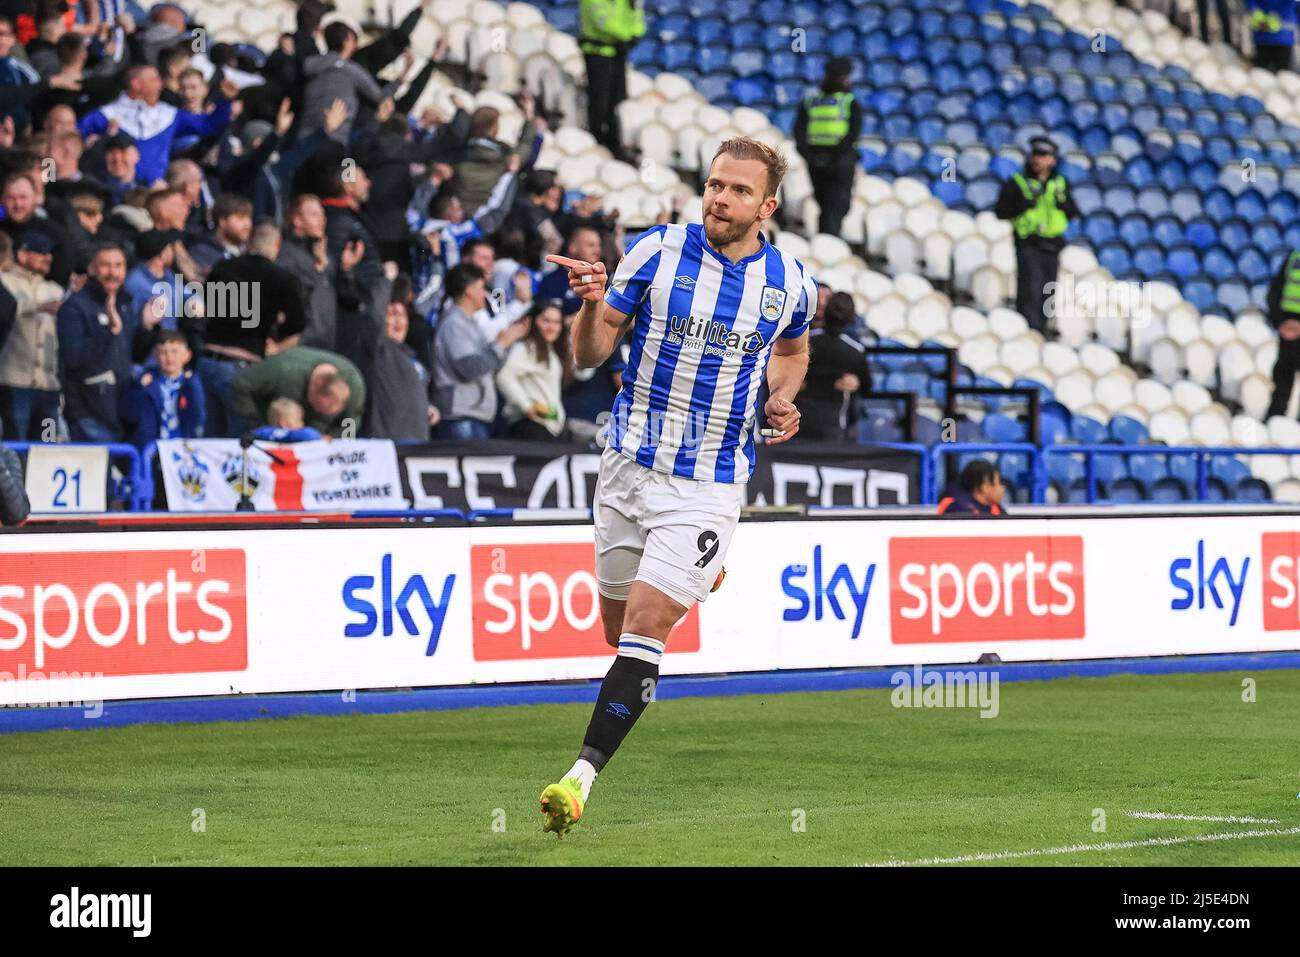 Huddersfield, UK. 22nd Apr, 2022. Jordan Rhodes #9 of Huddersfield Town  celebrates his goal to make it 1-0 in Huddersfield, United Kingdom on  4/22/2022. (Photo by Mark Cosgrove/News Images/Sipa USA) Credit: Sipa